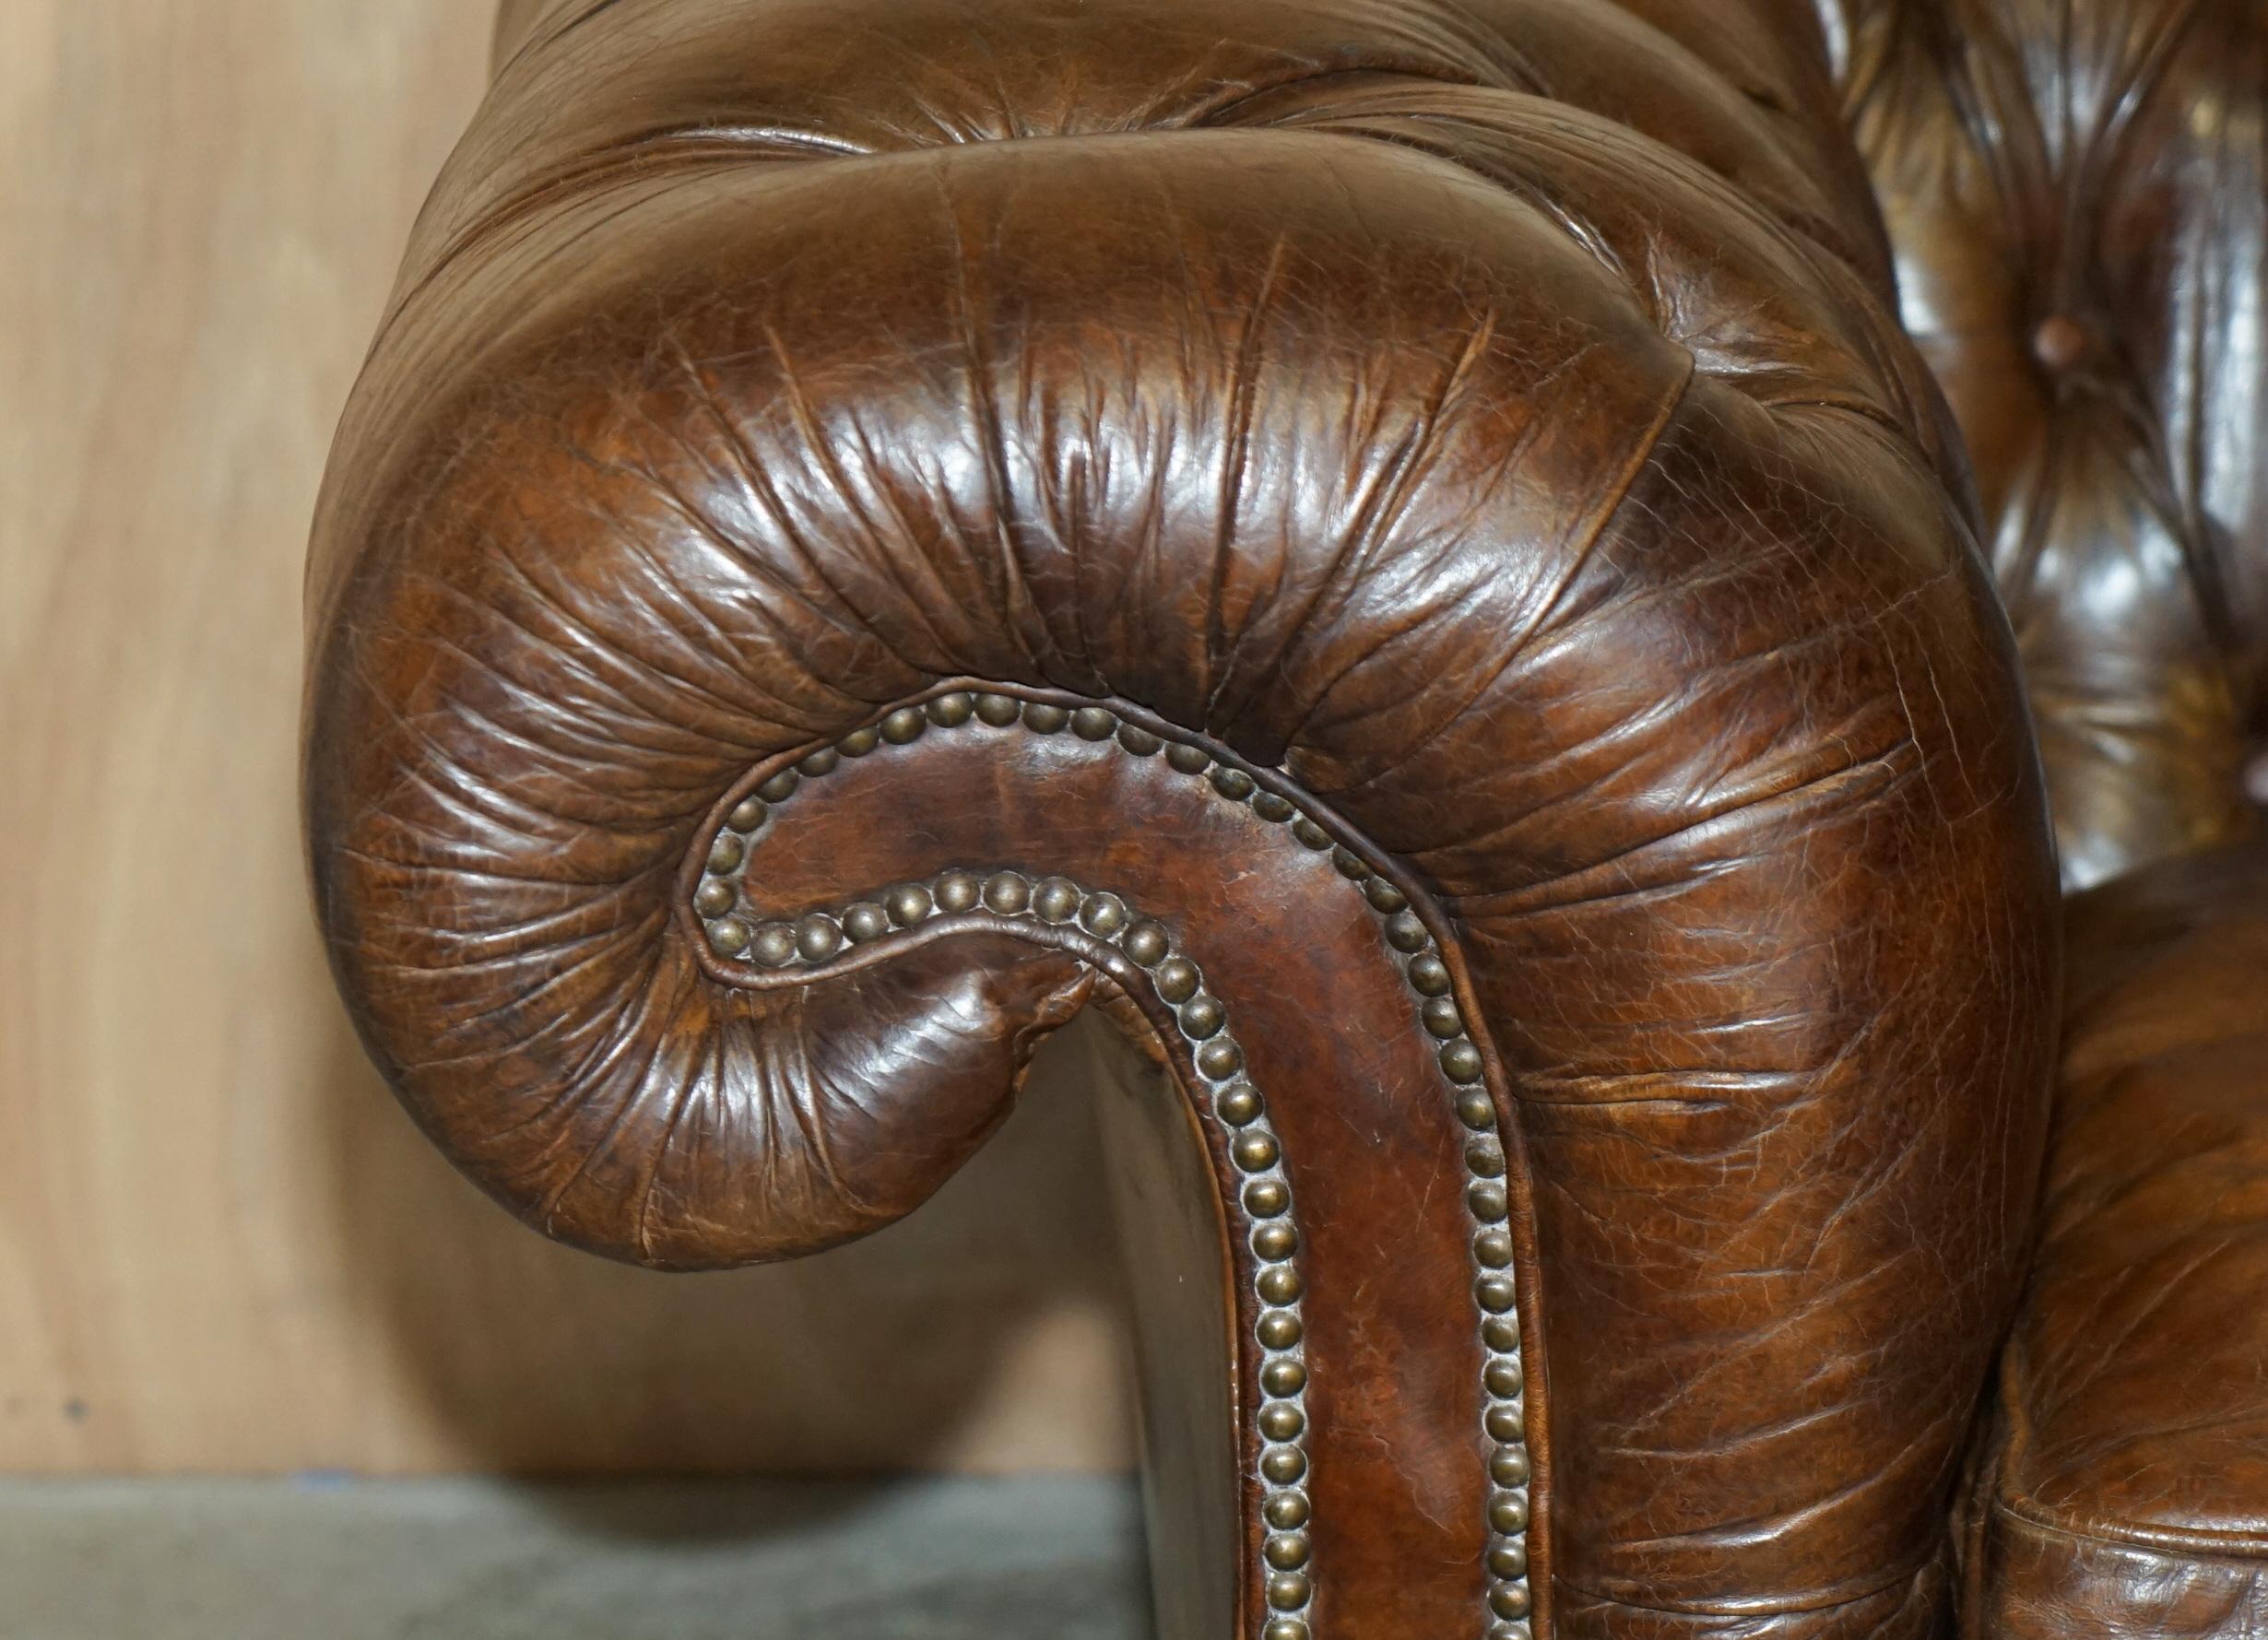 Chesterfield 1 OF 2 TIMOTHY OULTON HERITAGE BROWN OVERSIZED LEATHER CHESTERFIELD HALO SOFAs For Sale